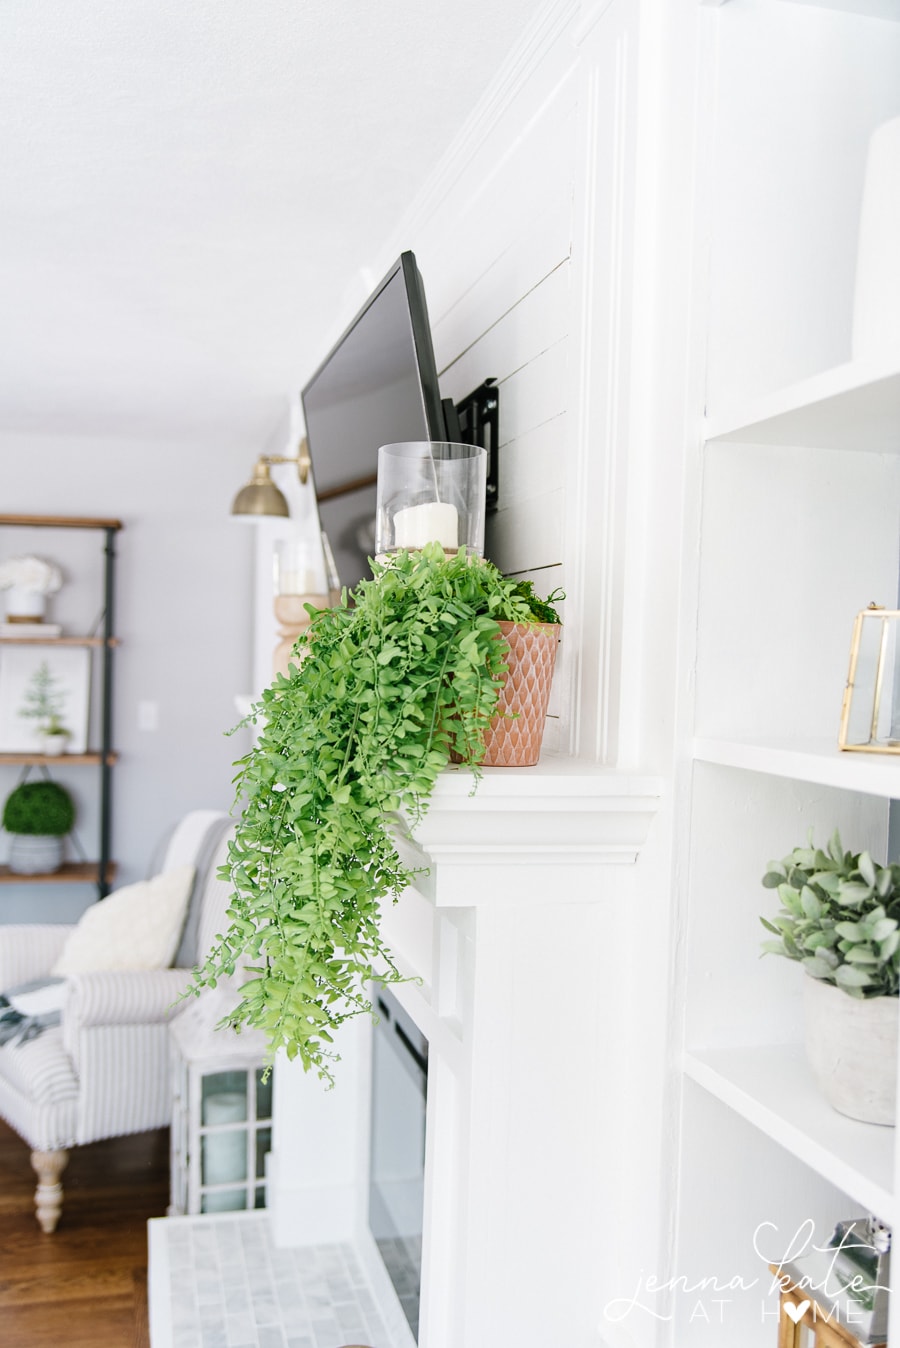 Place your faux trailing plant anywhere you'd like to add some fresh green color